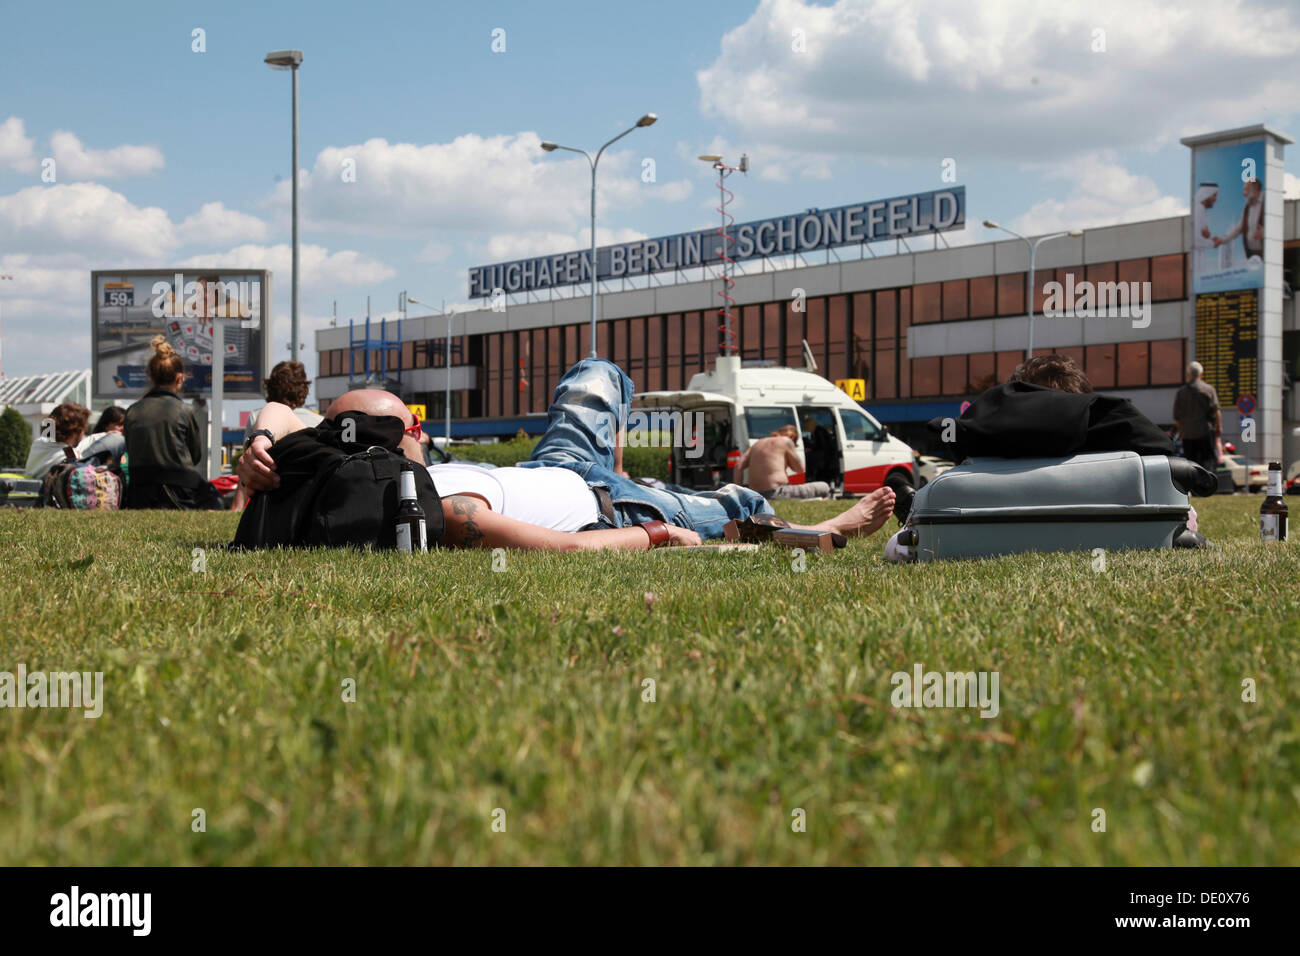 Passengers waiting for their flights on the lawn in front of the Berlin-Schoenefeld airport terminal building Stock Photo